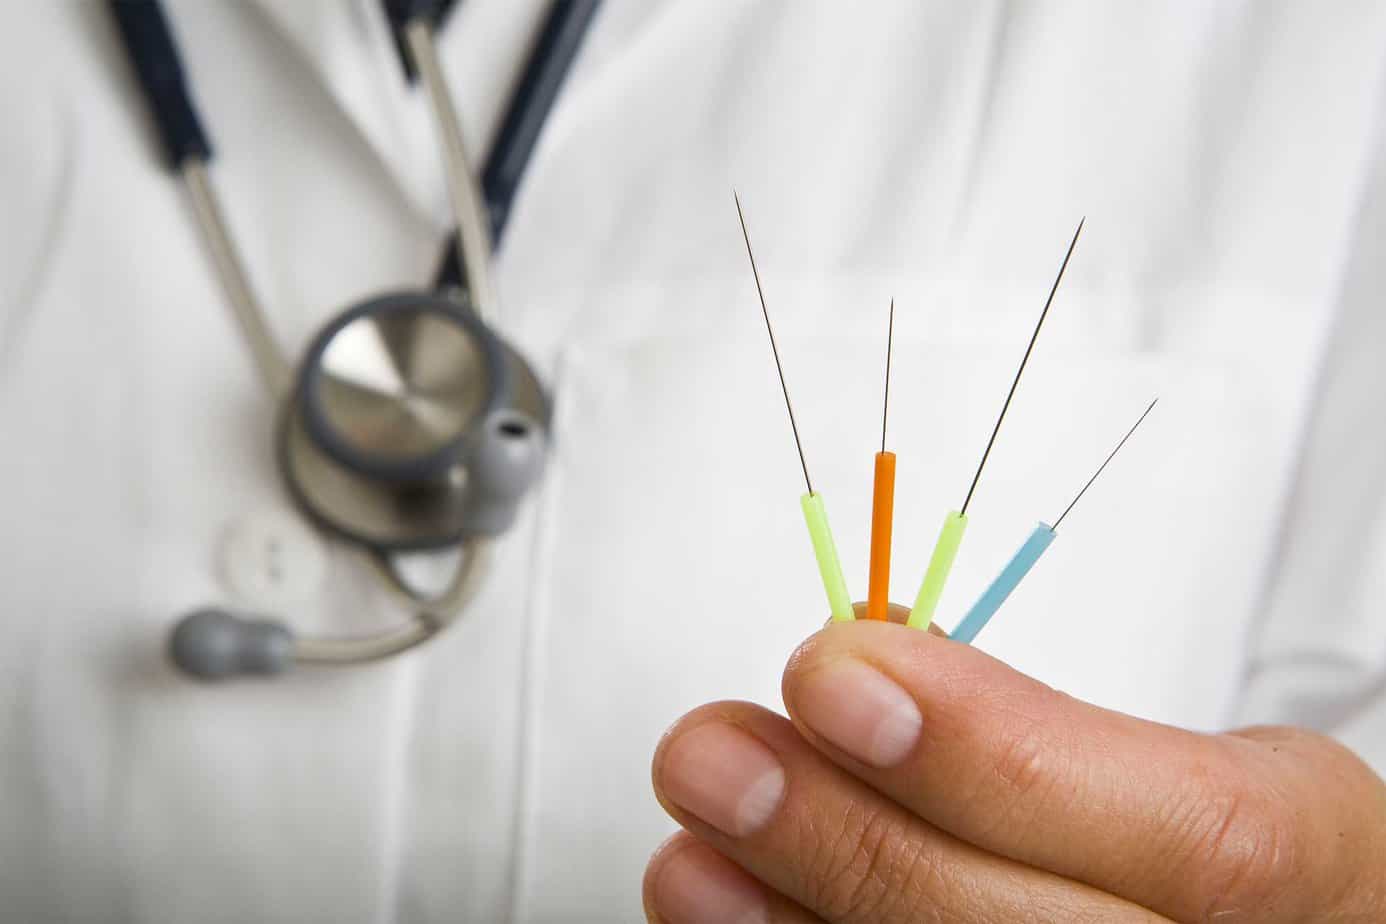 Study Says: Acupuncture Is a Safe Alternative for Painkillers